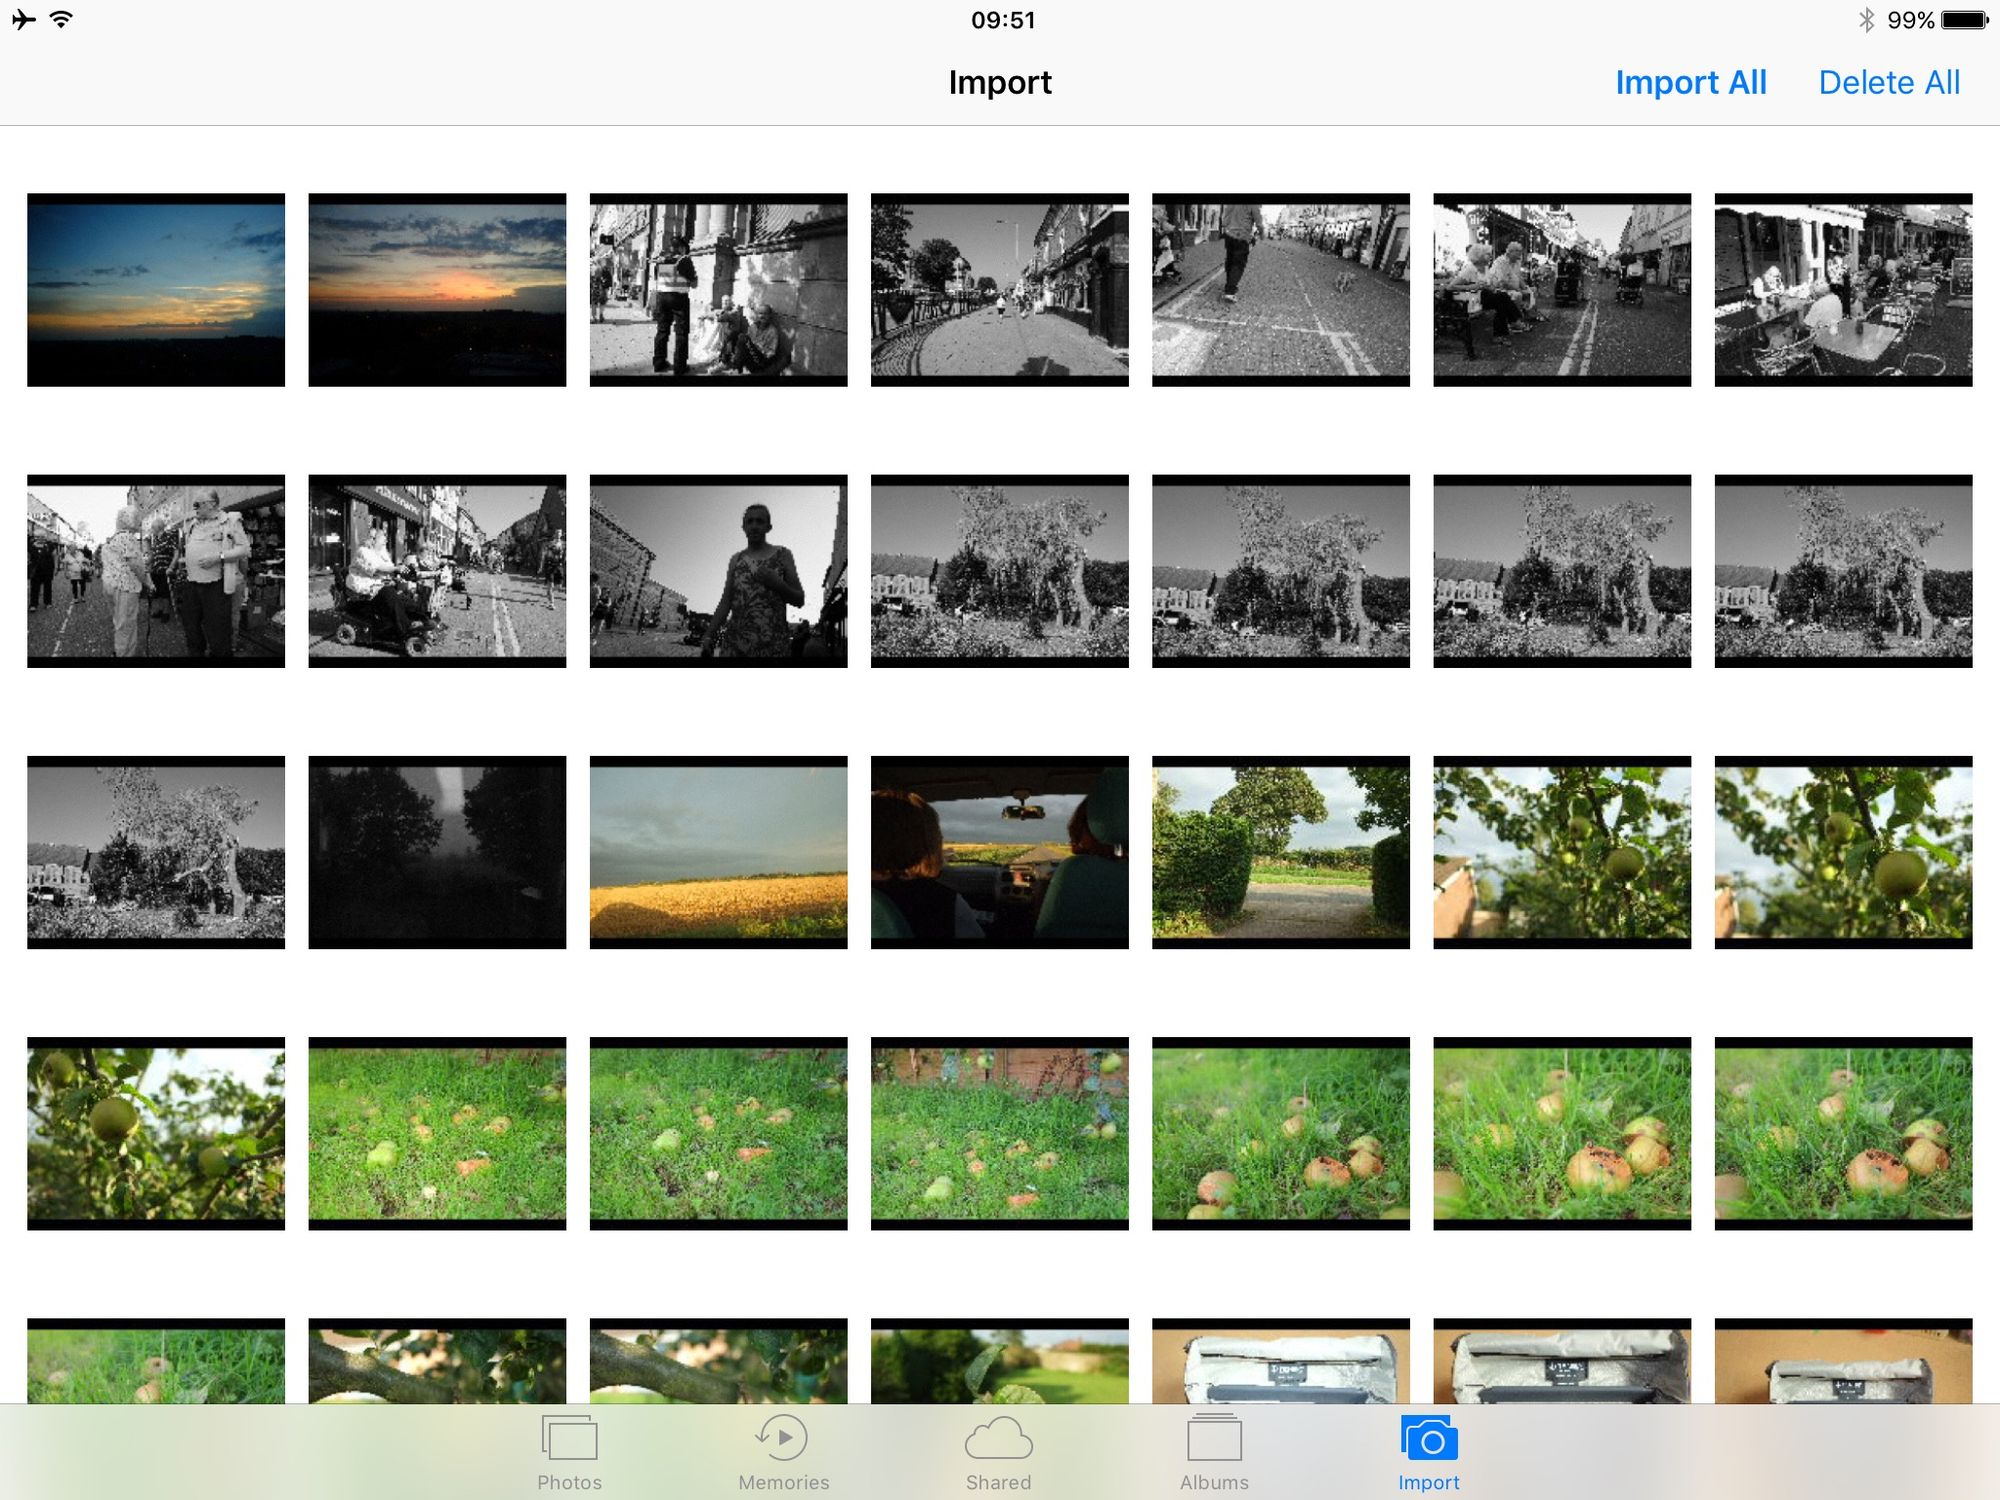 Importing photos on iOS. Some of these files are raw+JPEG pairs, some JPEGs, but there's no way of telling which is which